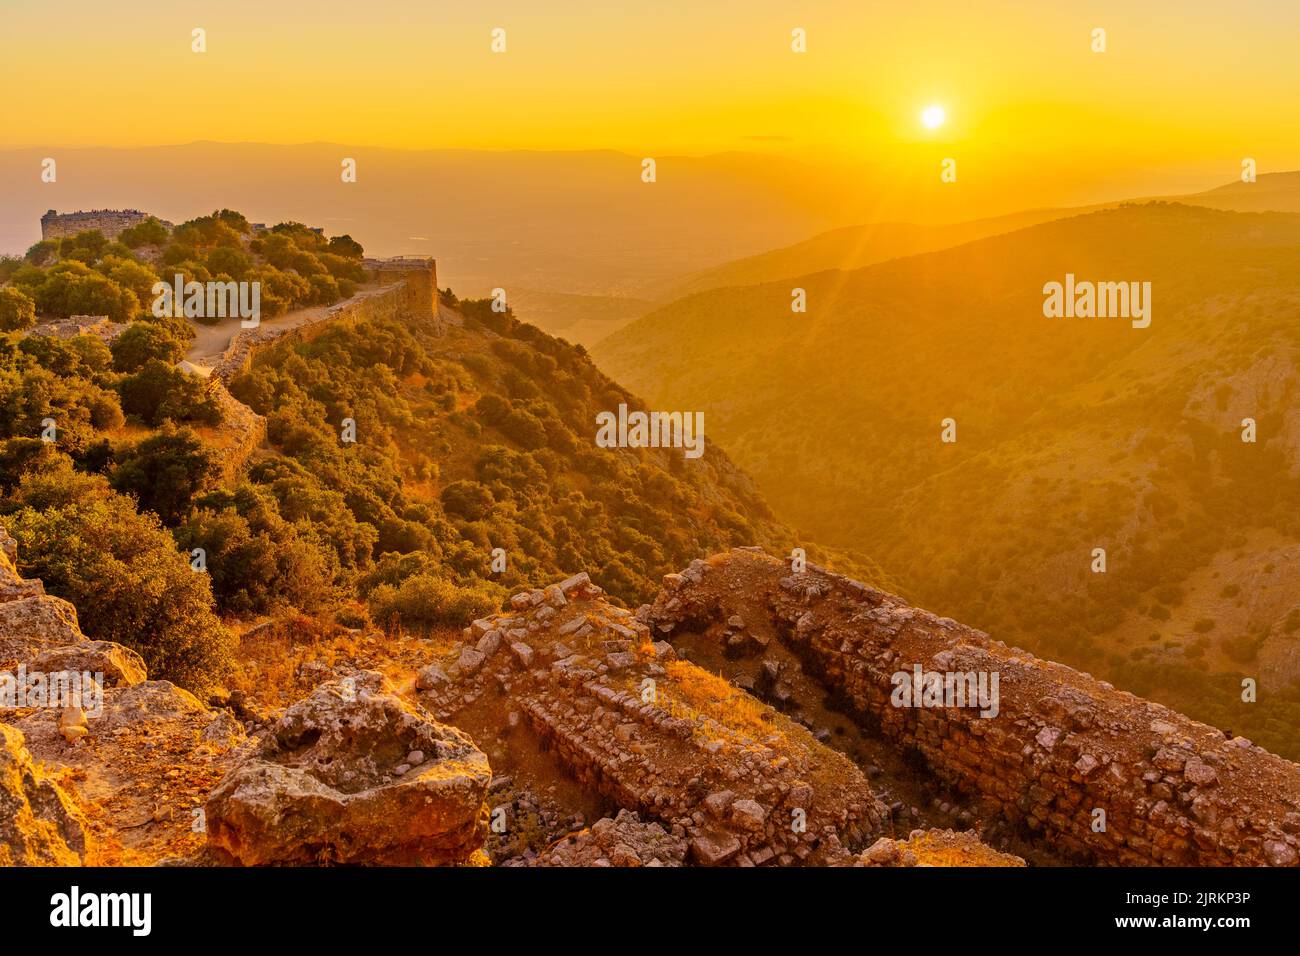 Sunset view of the medieval Nimrod fortress, with nearby landscape, the Golan Heights, Northern Israel Stock Photo